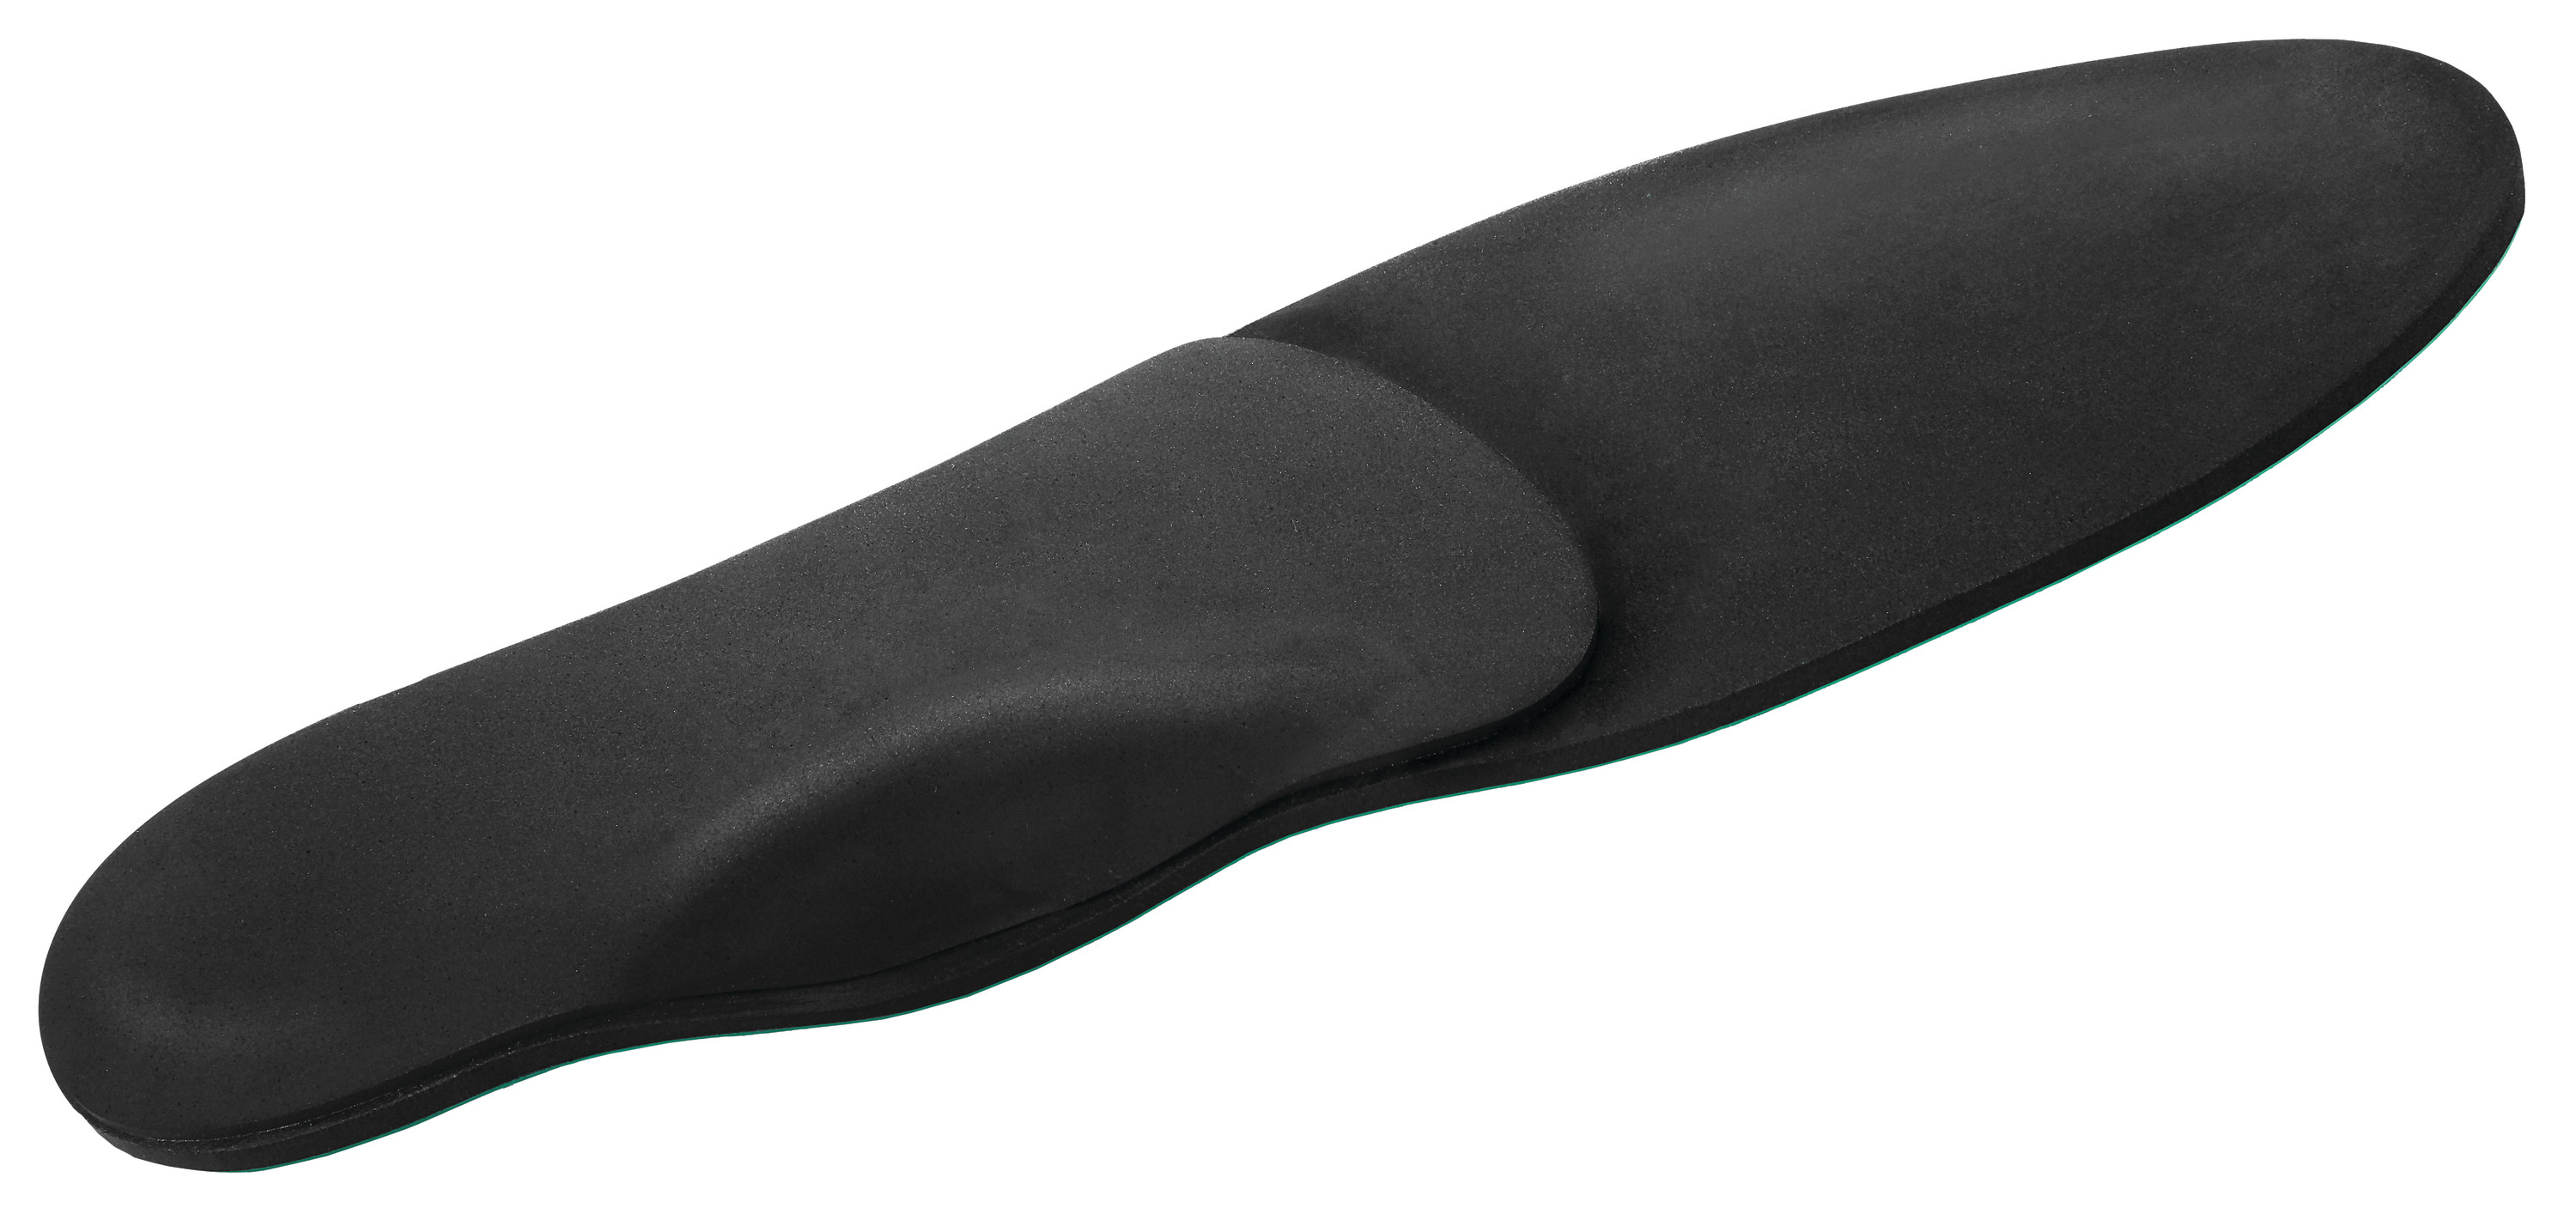 Spenco Rx Arch Cushions Insole - image 3 of 4